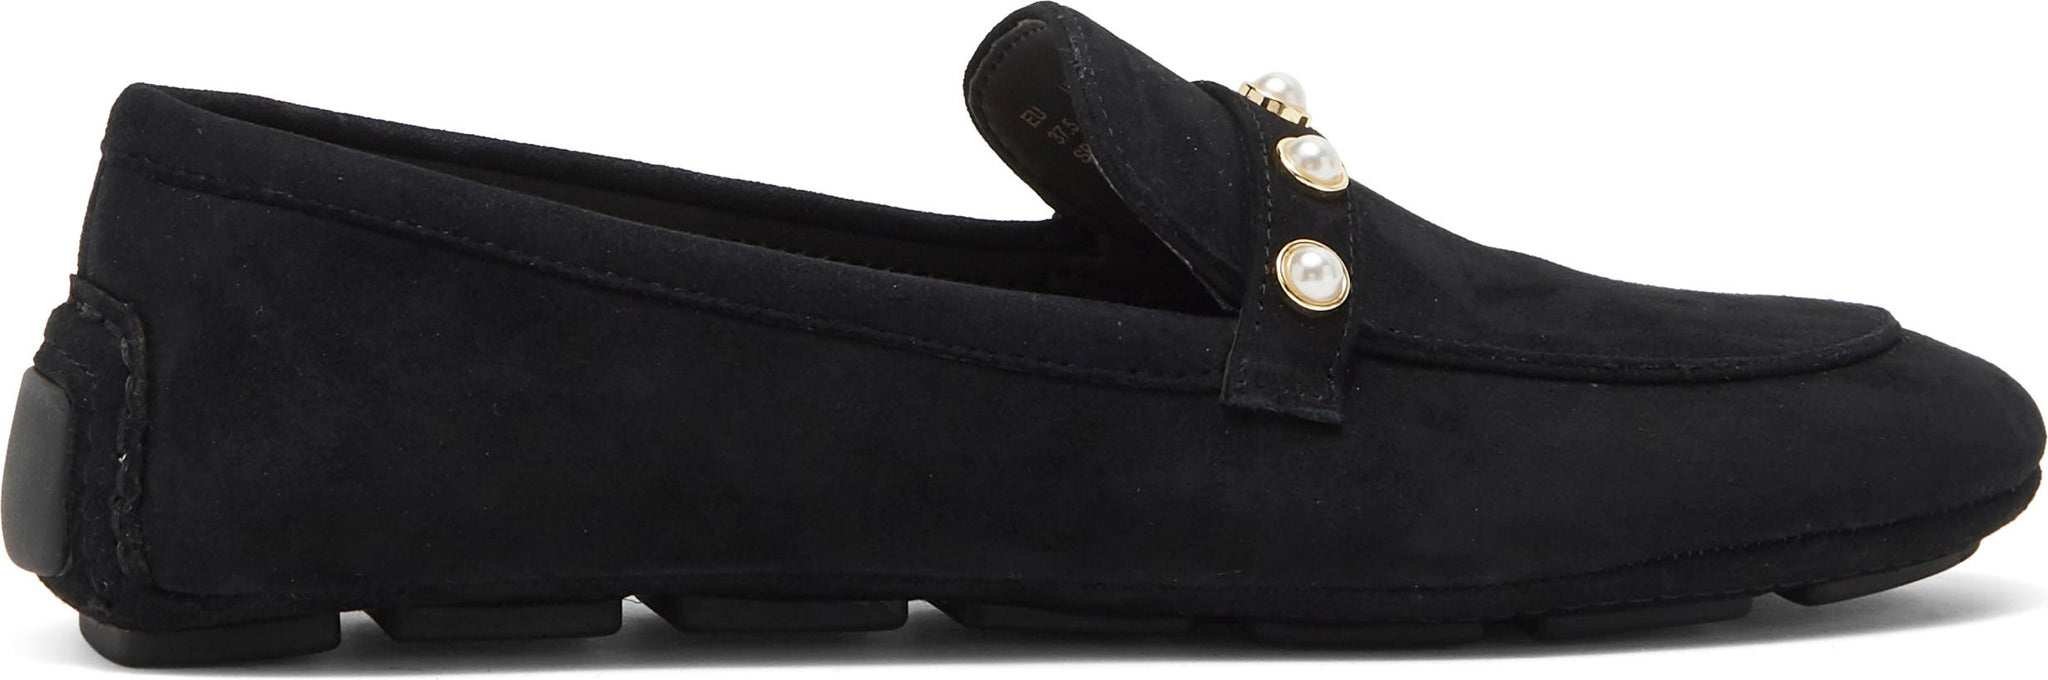 STUART WEITZMAN Allpearls Faux Pearl Studded Driving Loafer, Main, color, BLACK